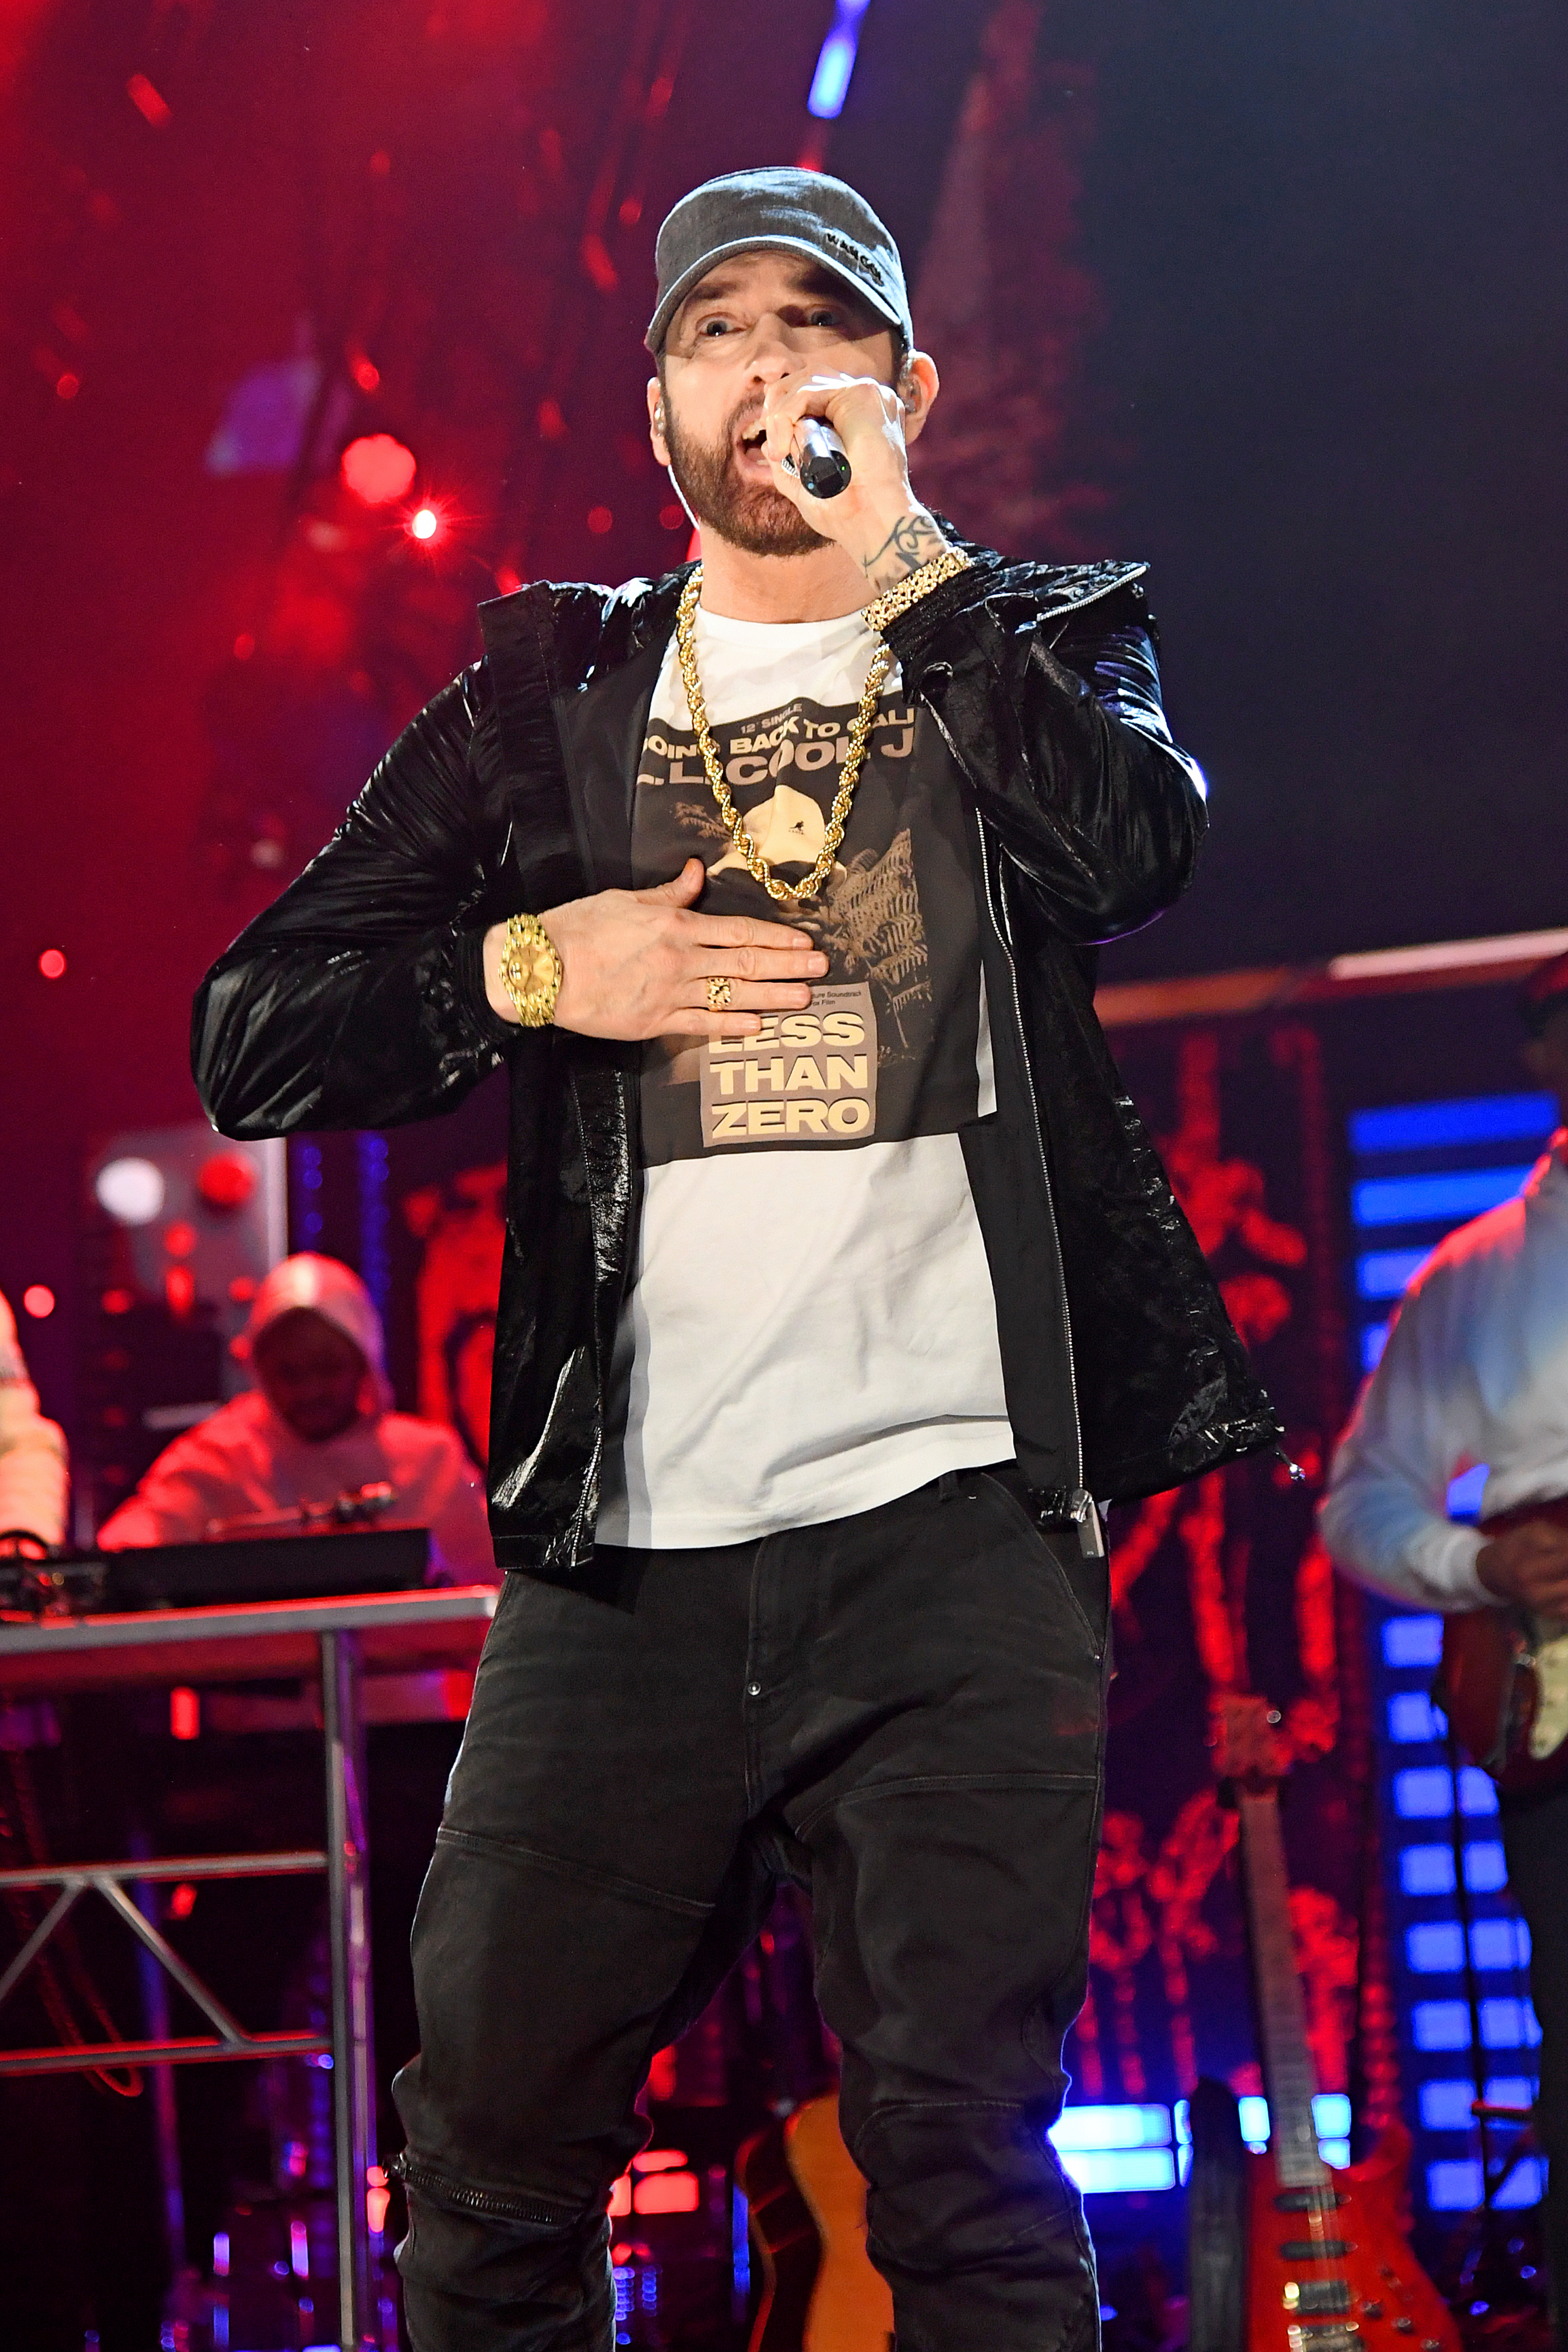 Eminem performs during the 36th Annual Rock & Roll Hall Of Fame Induction Ceremony on October 30, 2021 in Cleveland, Ohio | Source: Getty Images